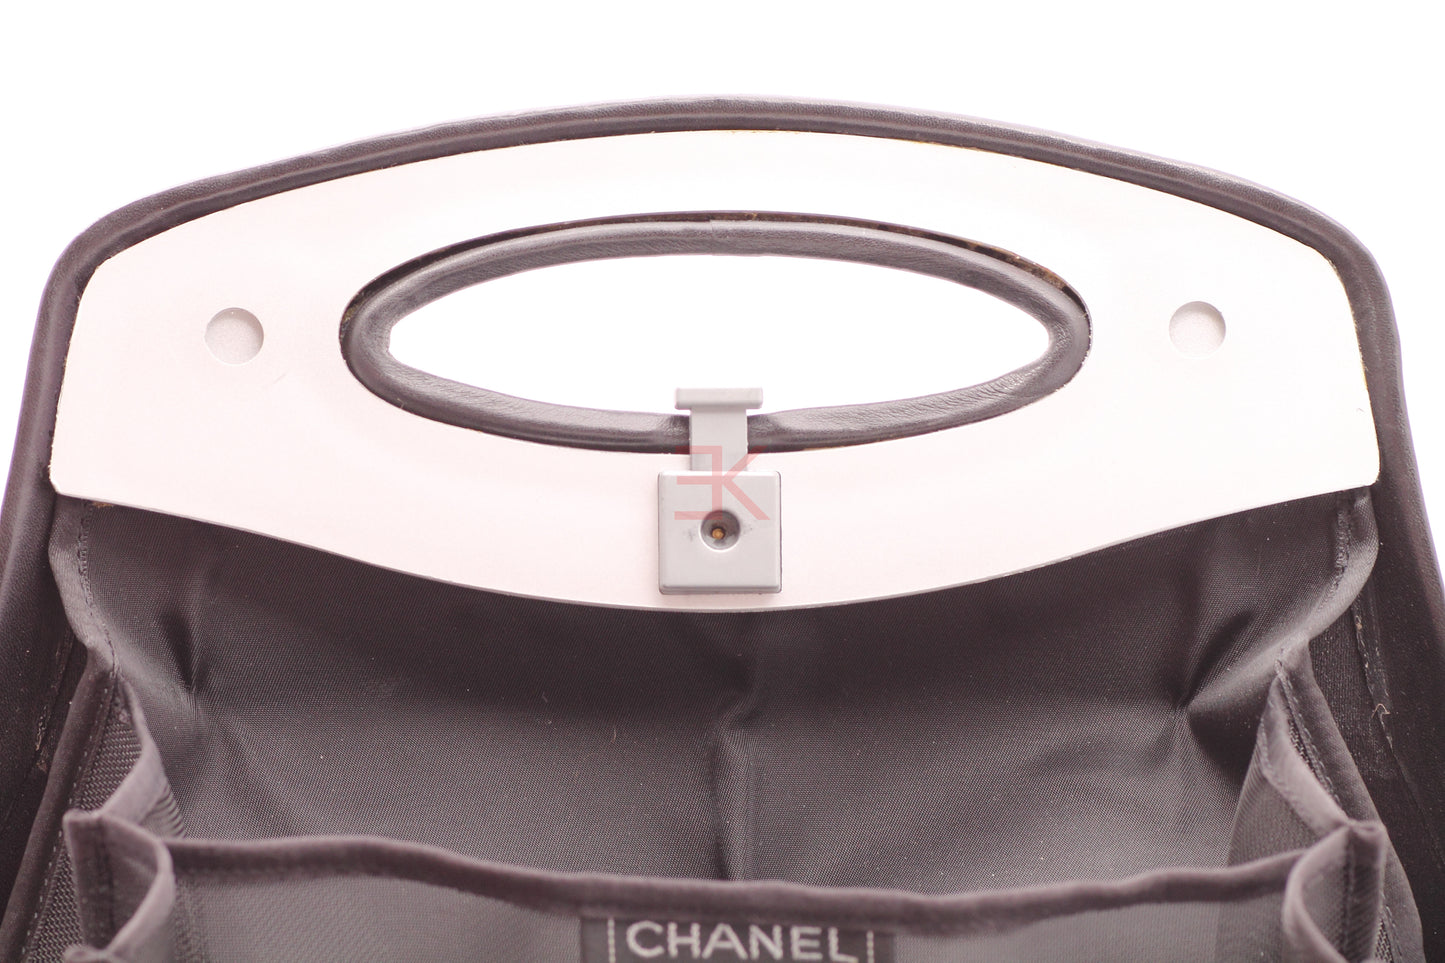 Chanel Chanel Butt Black Leather Hard Case Hand Bag - 2005 Limited